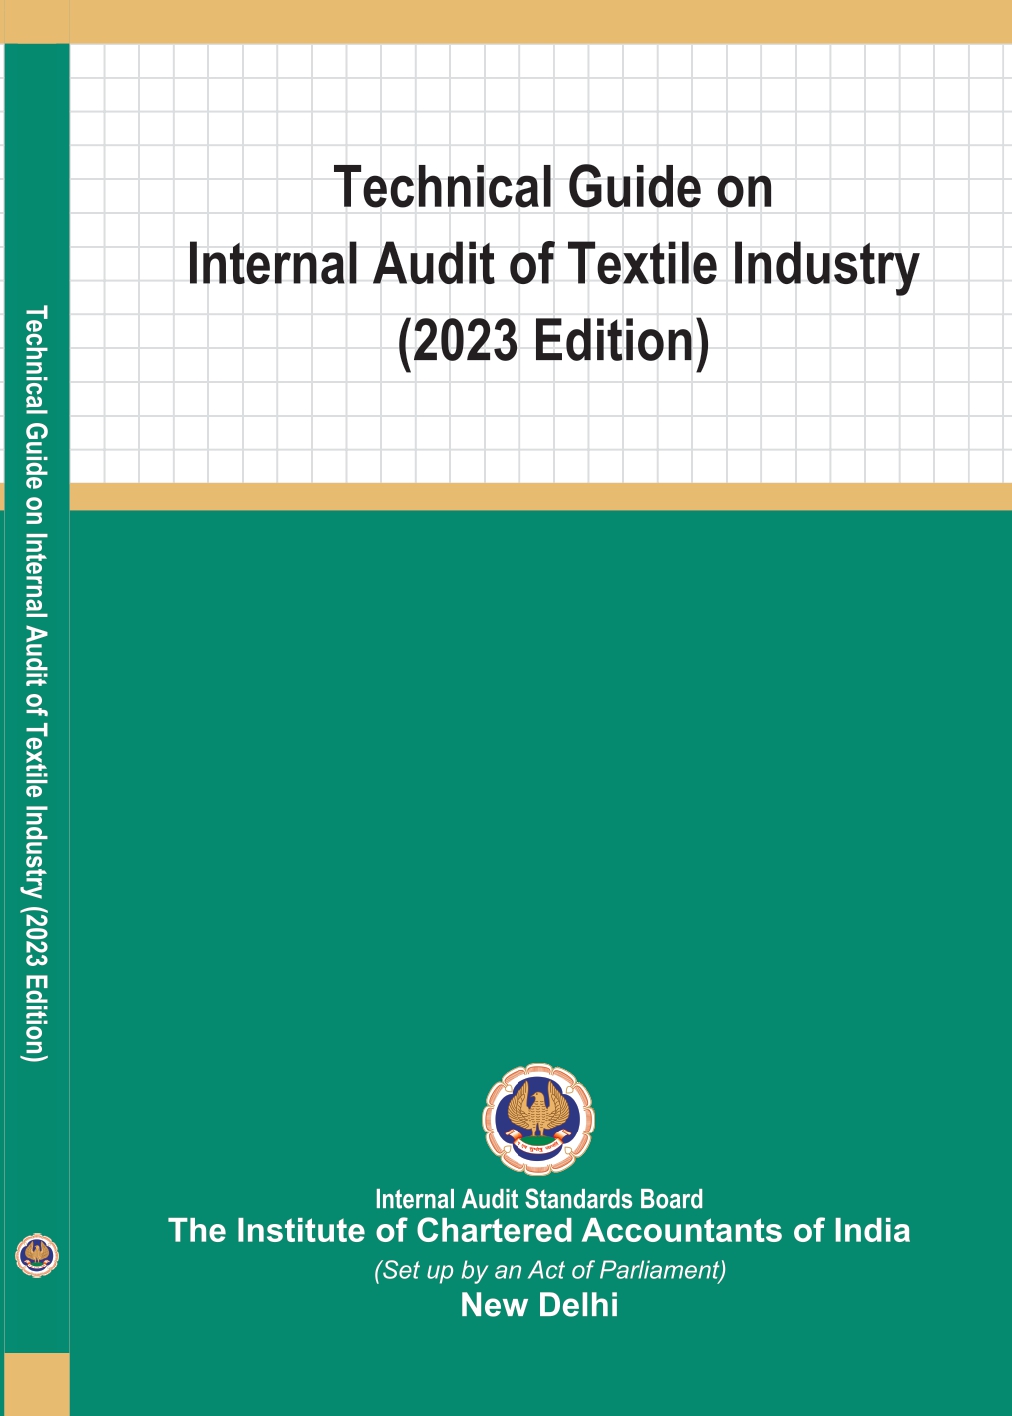 Technical Guide on Internal Audit of Textile Industry - Revised 2nd Edition - February, 2023